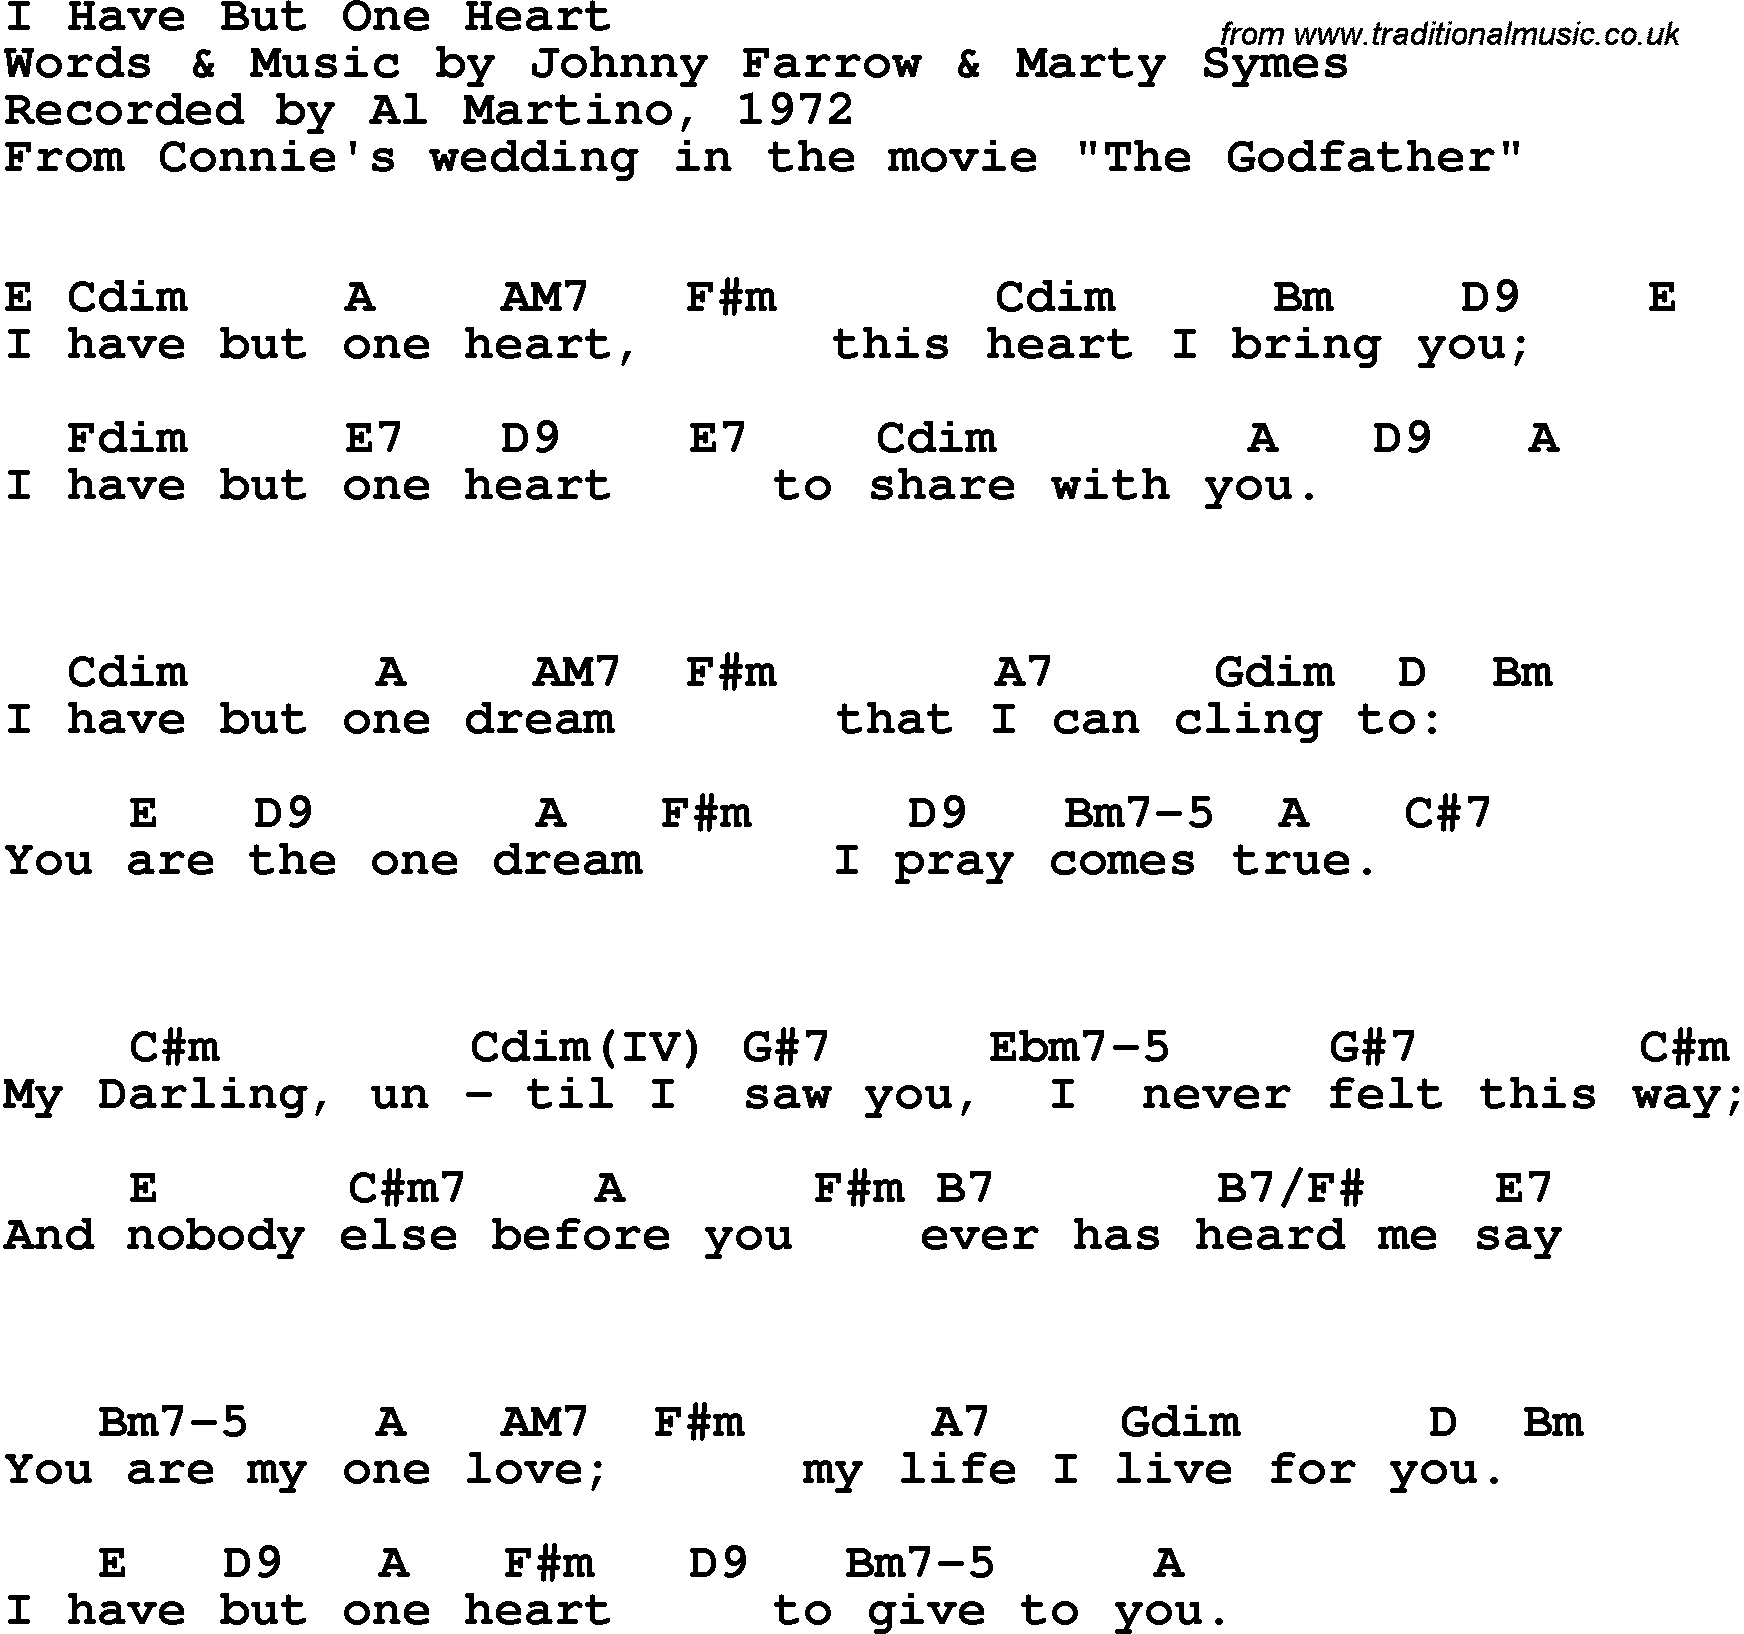 Song Lyrics with guitar chords for I Have But One Heart - Al Martino, 1972